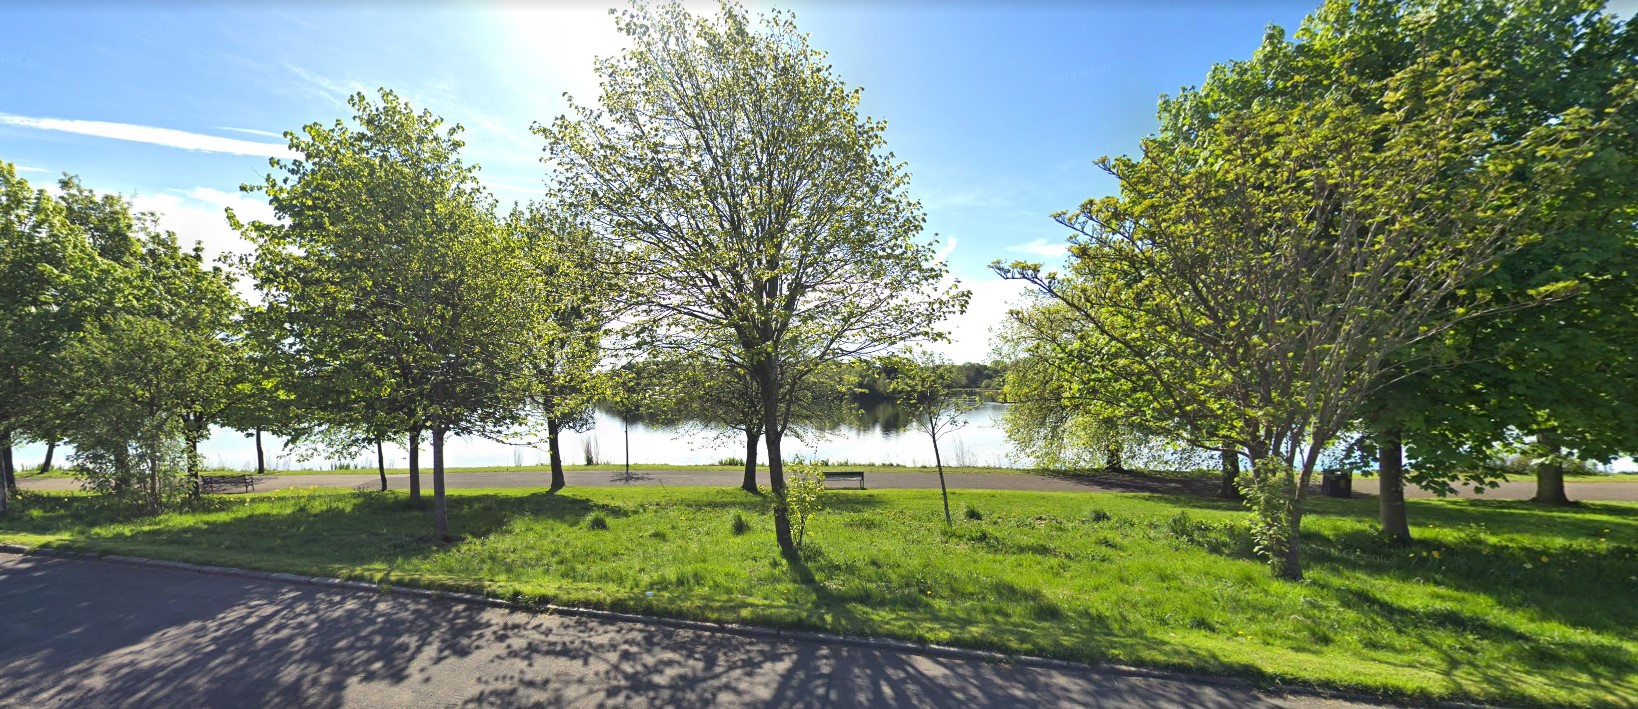 49 new homes to be built on former B&Q site at Hogganfield Loch